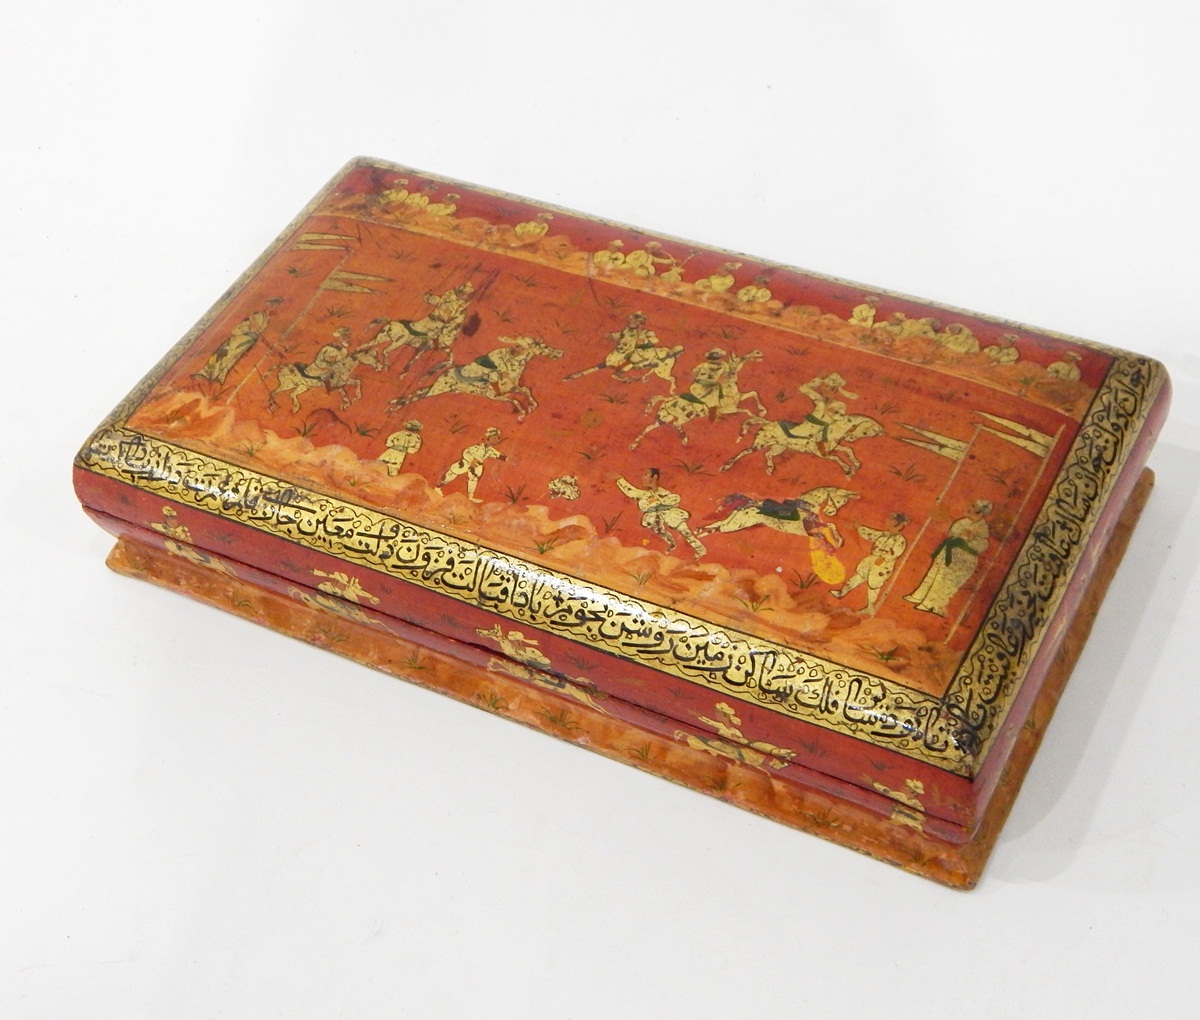 Carved hardwood cigarette box, intricately decorated with foliate scrolls,